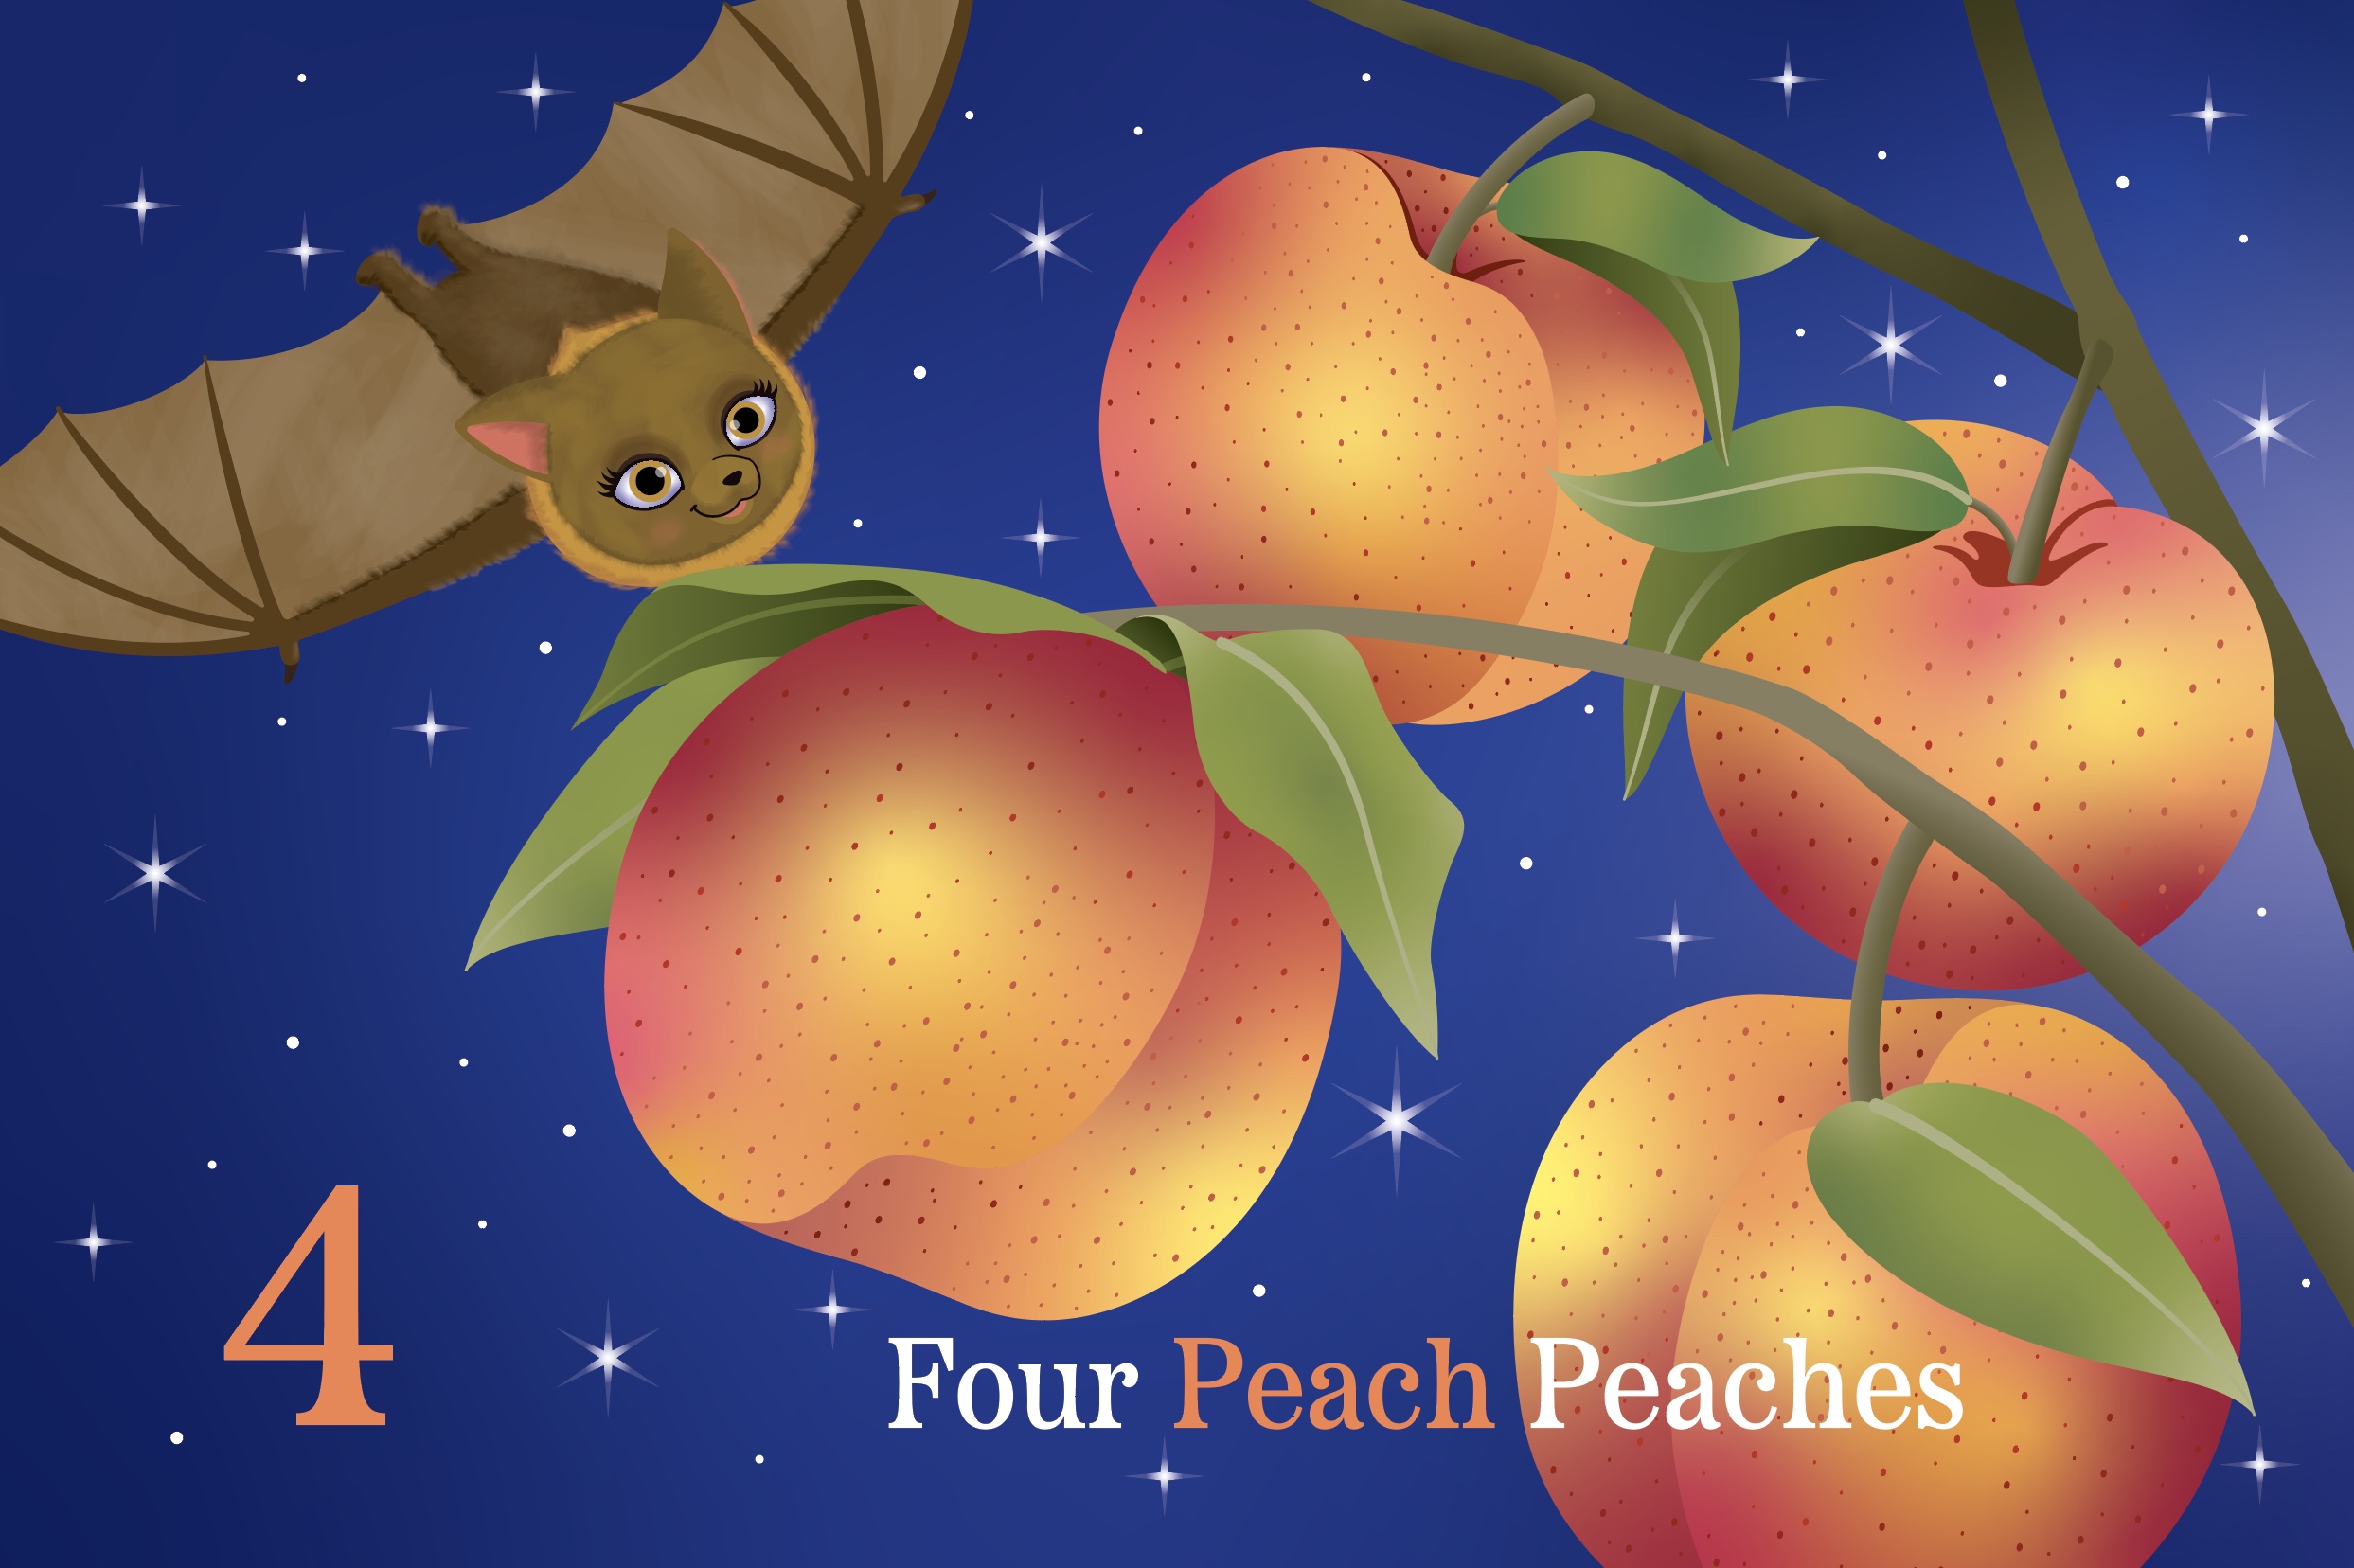 slide 3 Educational Children's Stories - Bonita the Fruit Bat Counts to Ten, by Bonnie Lady Lee. [Excerpt] Two red cherries.